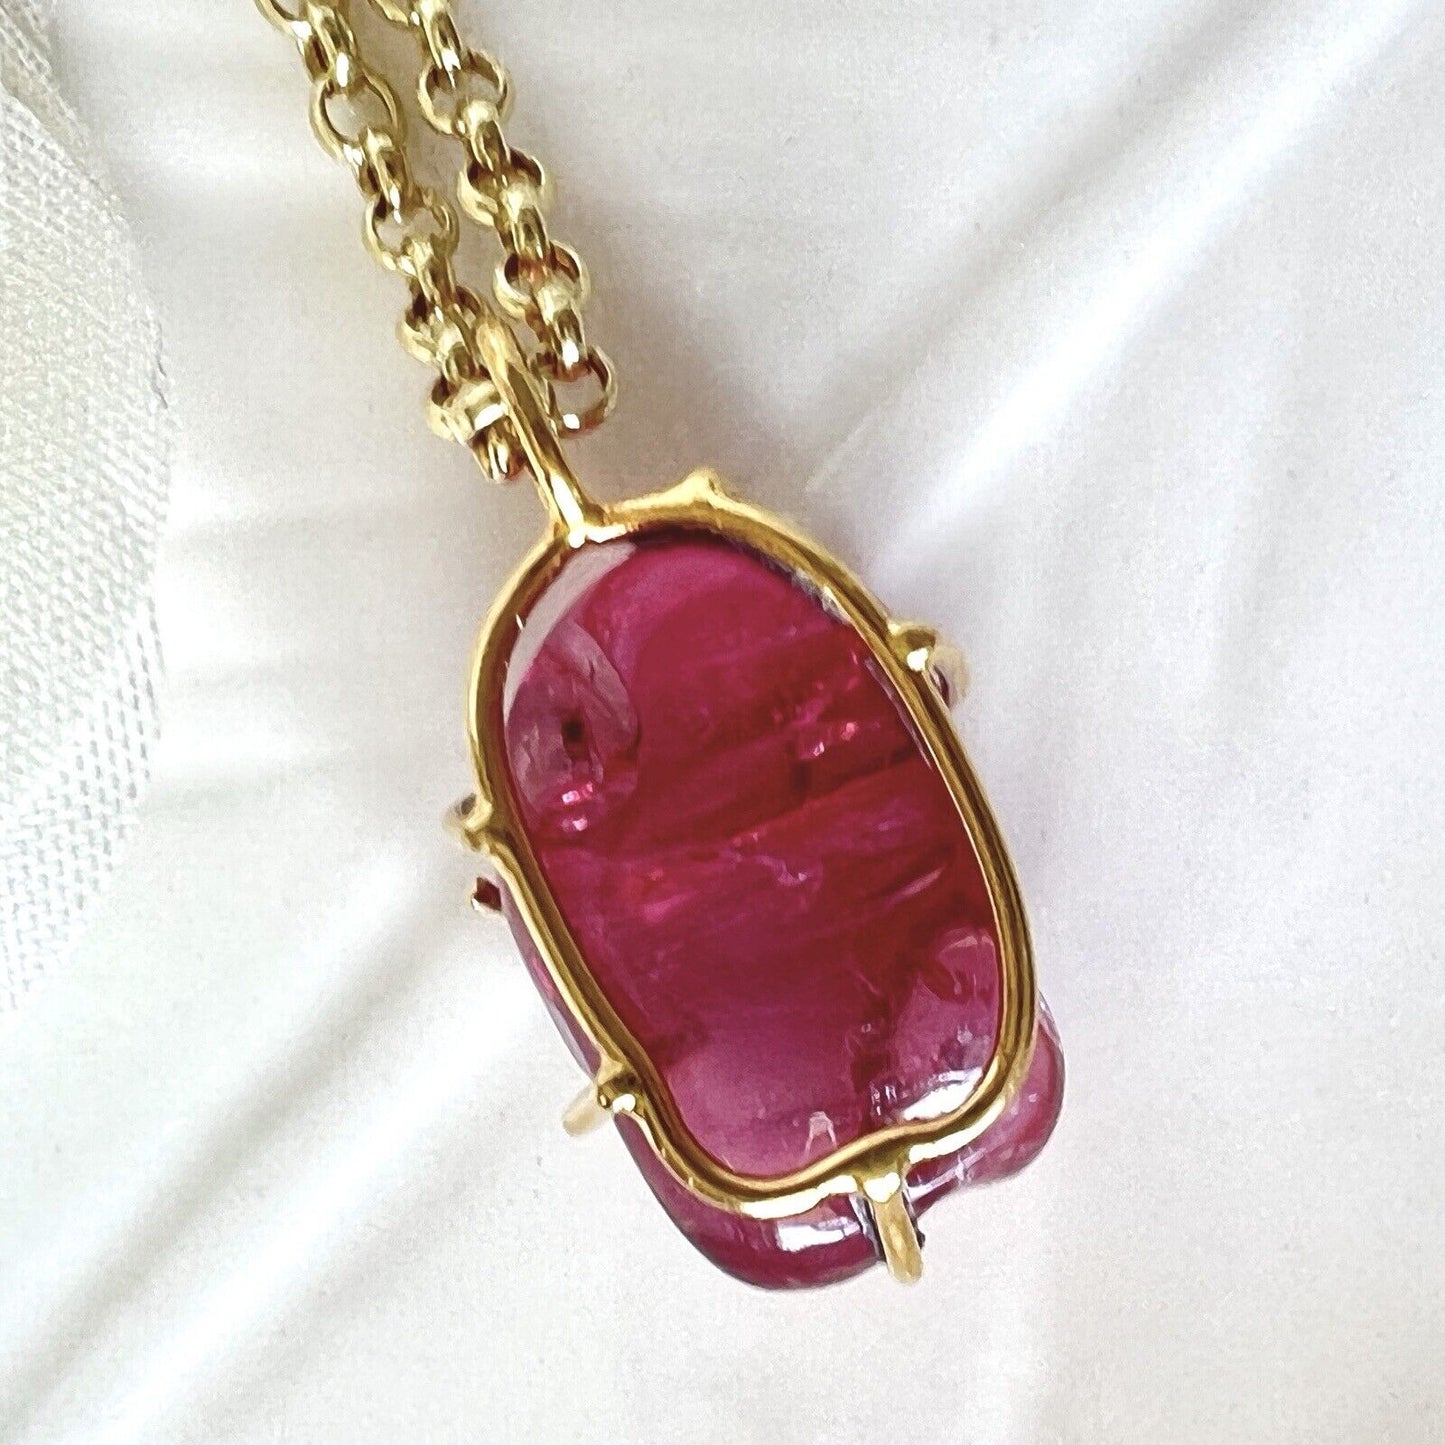 Solid 14k Yellow Gold Natural Smooth Pink Tourmaline (15ct) Nugget Pendant, New